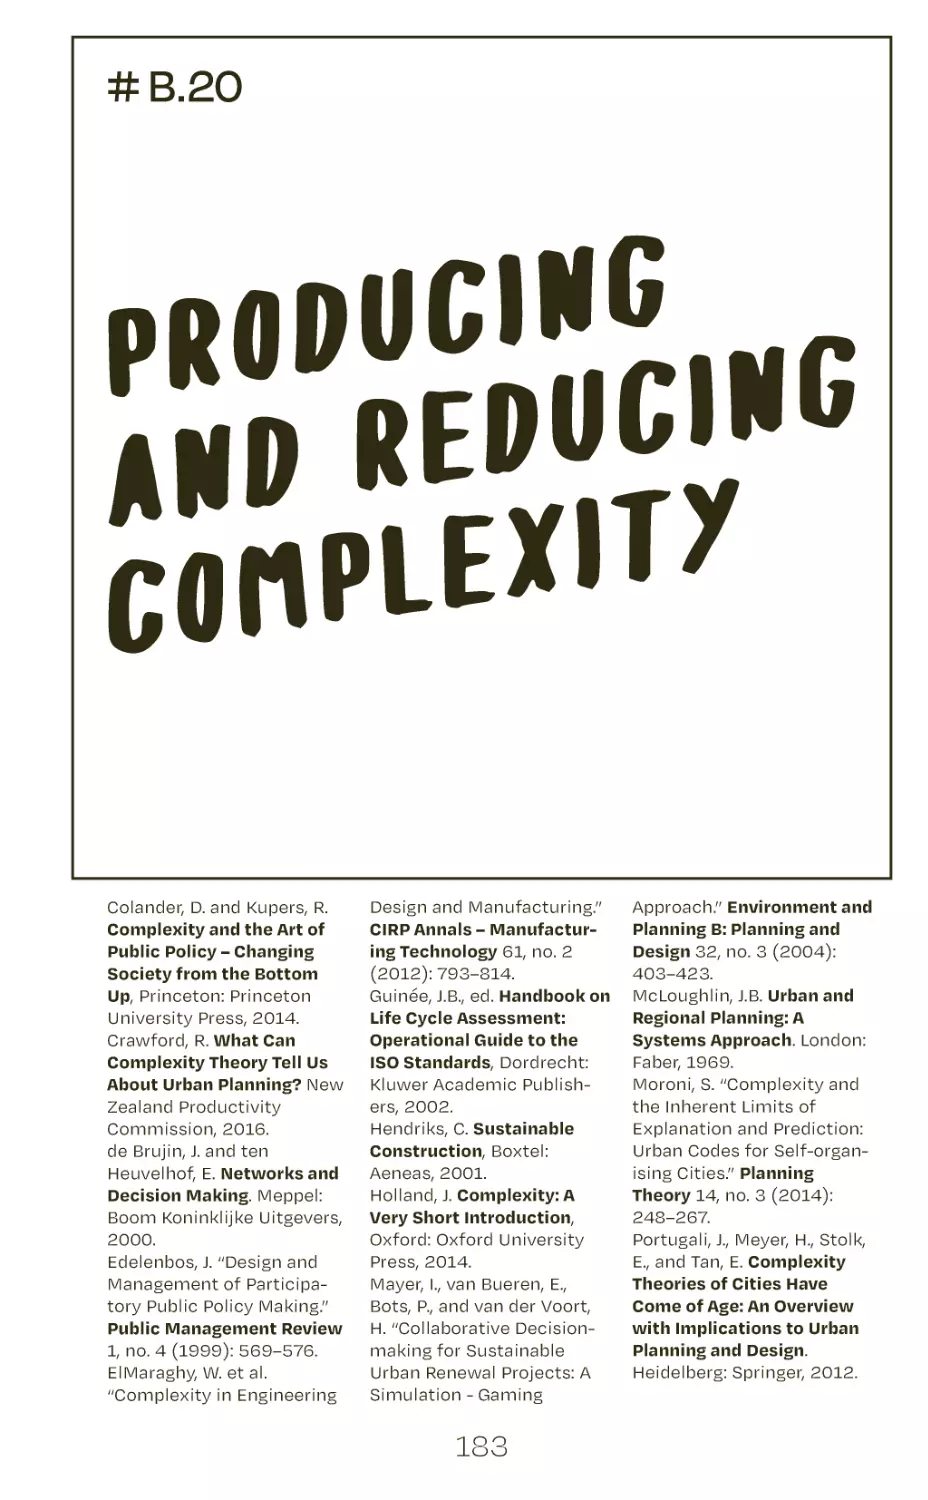 # B.20 producing and reducing complexity